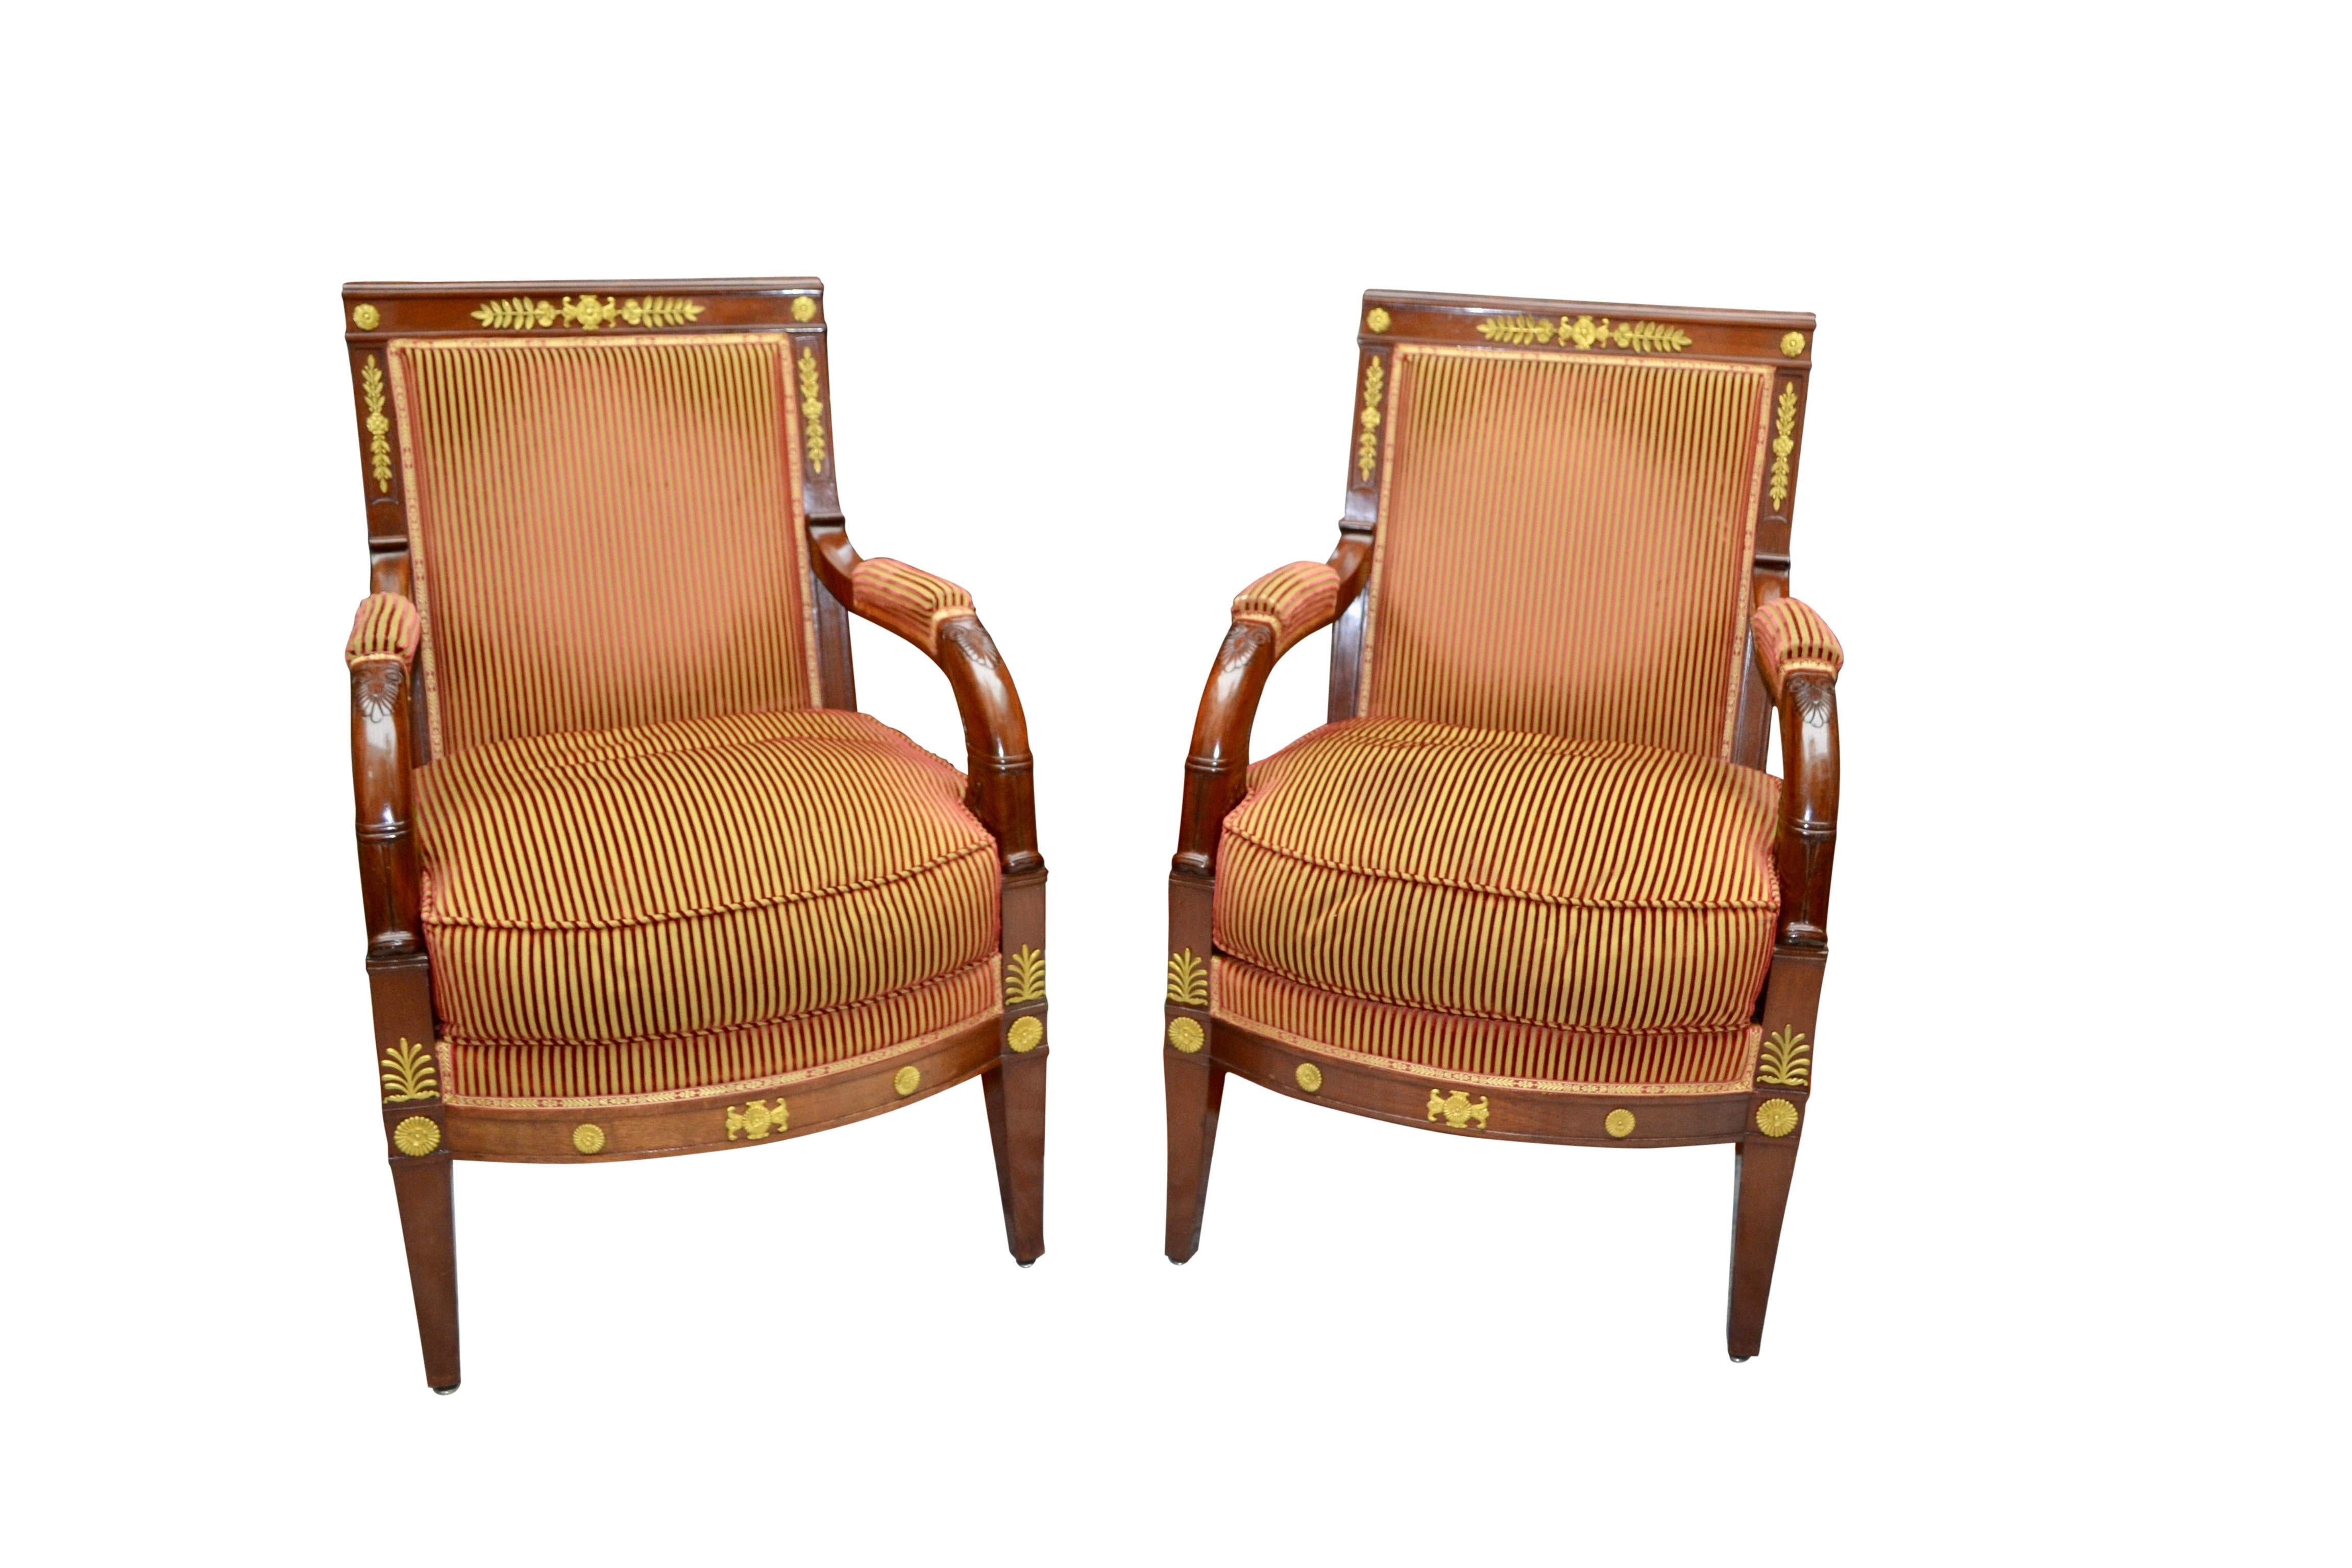 Bronze Pair of Early 19th Century French Empire Mahogany Armchairs called 